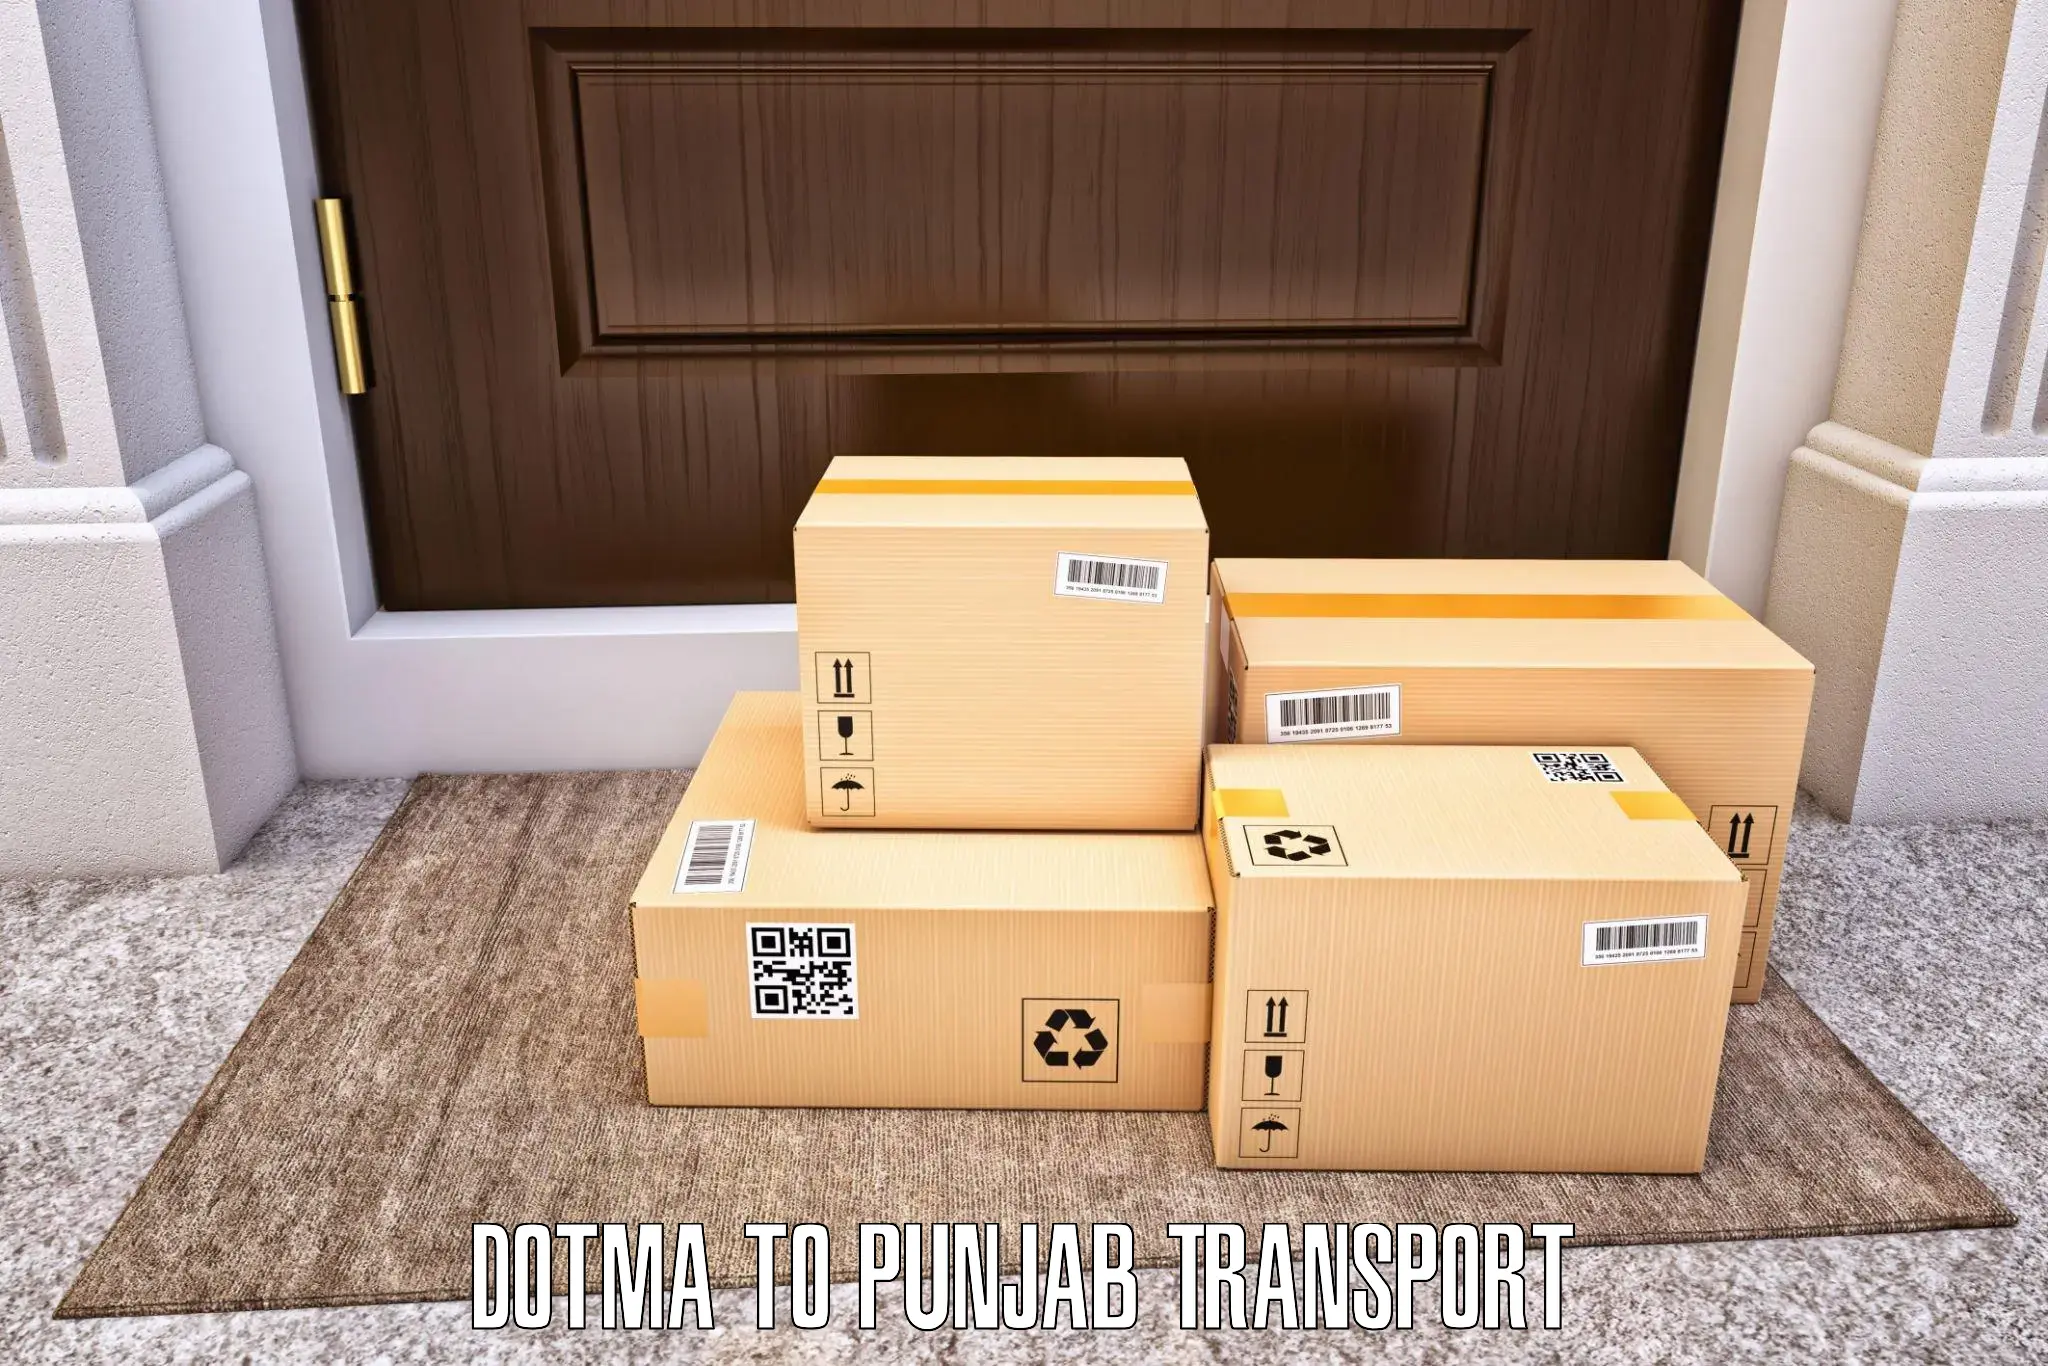 All India transport service Dotma to Phillaur